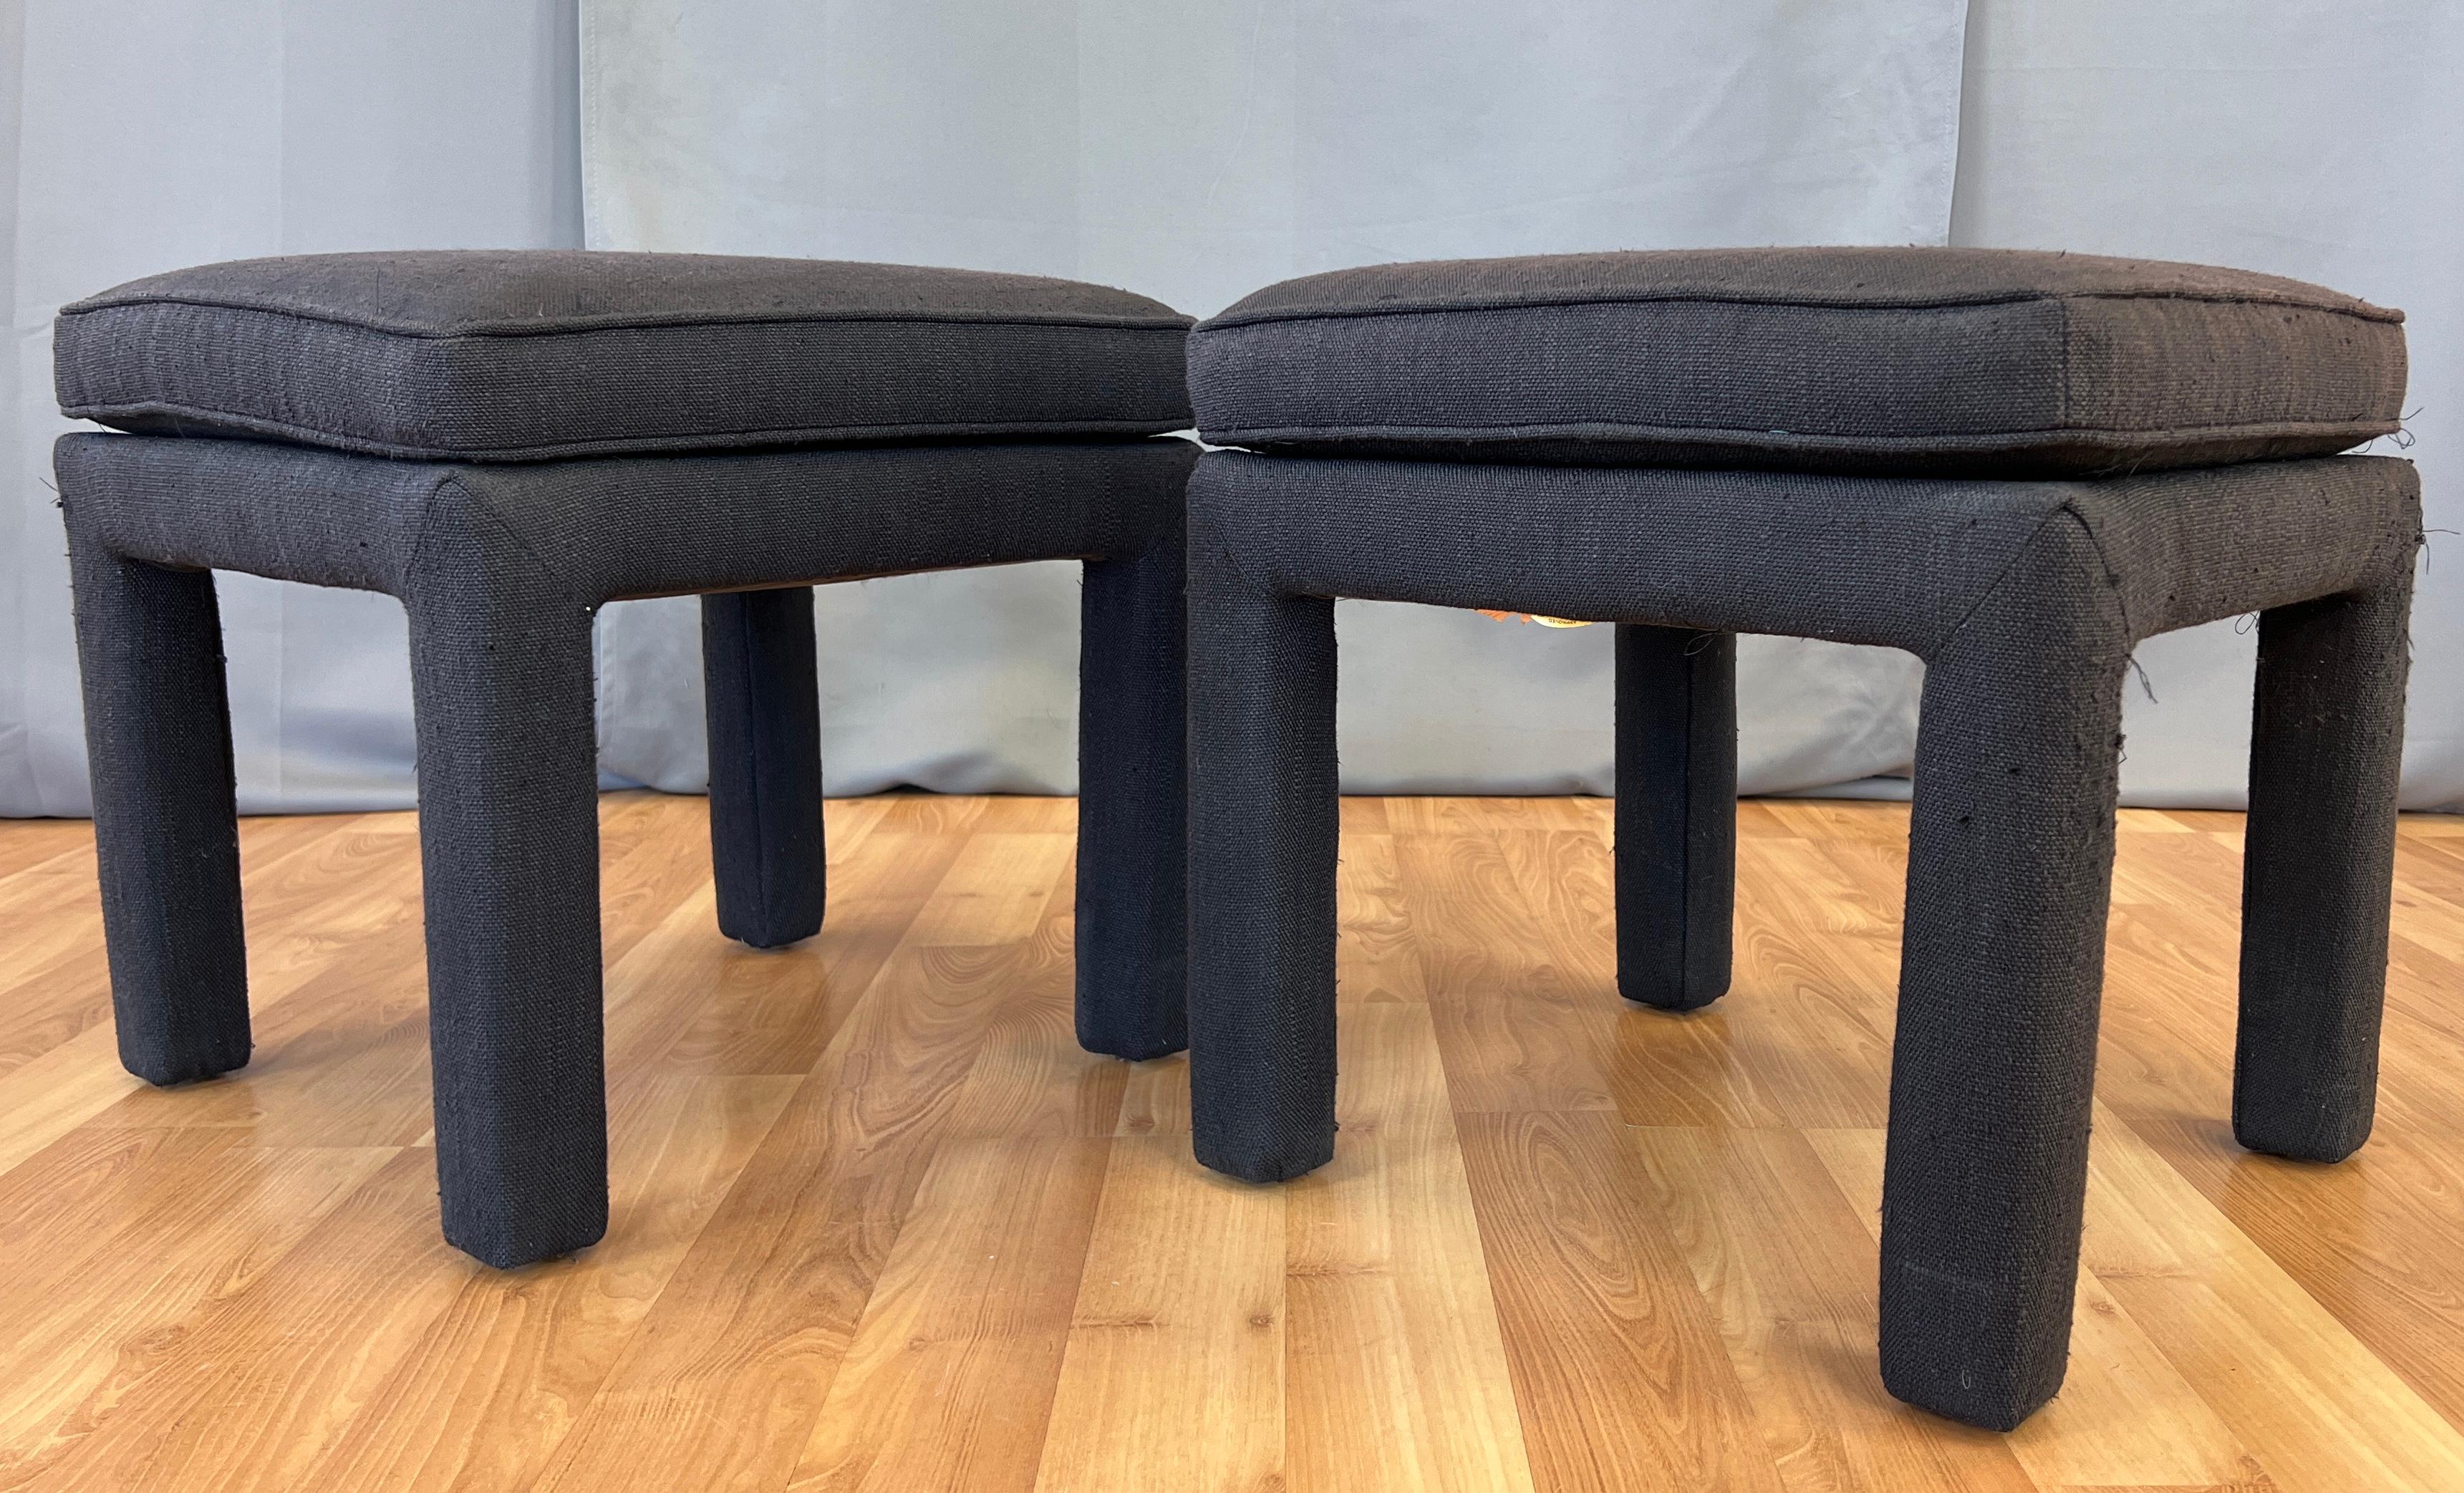 A pair of 1990s vintage Parsons style ottomans in a Milo Baughman design style, that was sold by Breuners.
A nice look and a perfect size for easy extra seating or just to put you feet up, both just waiting for a new fabric
to match your decor.
 